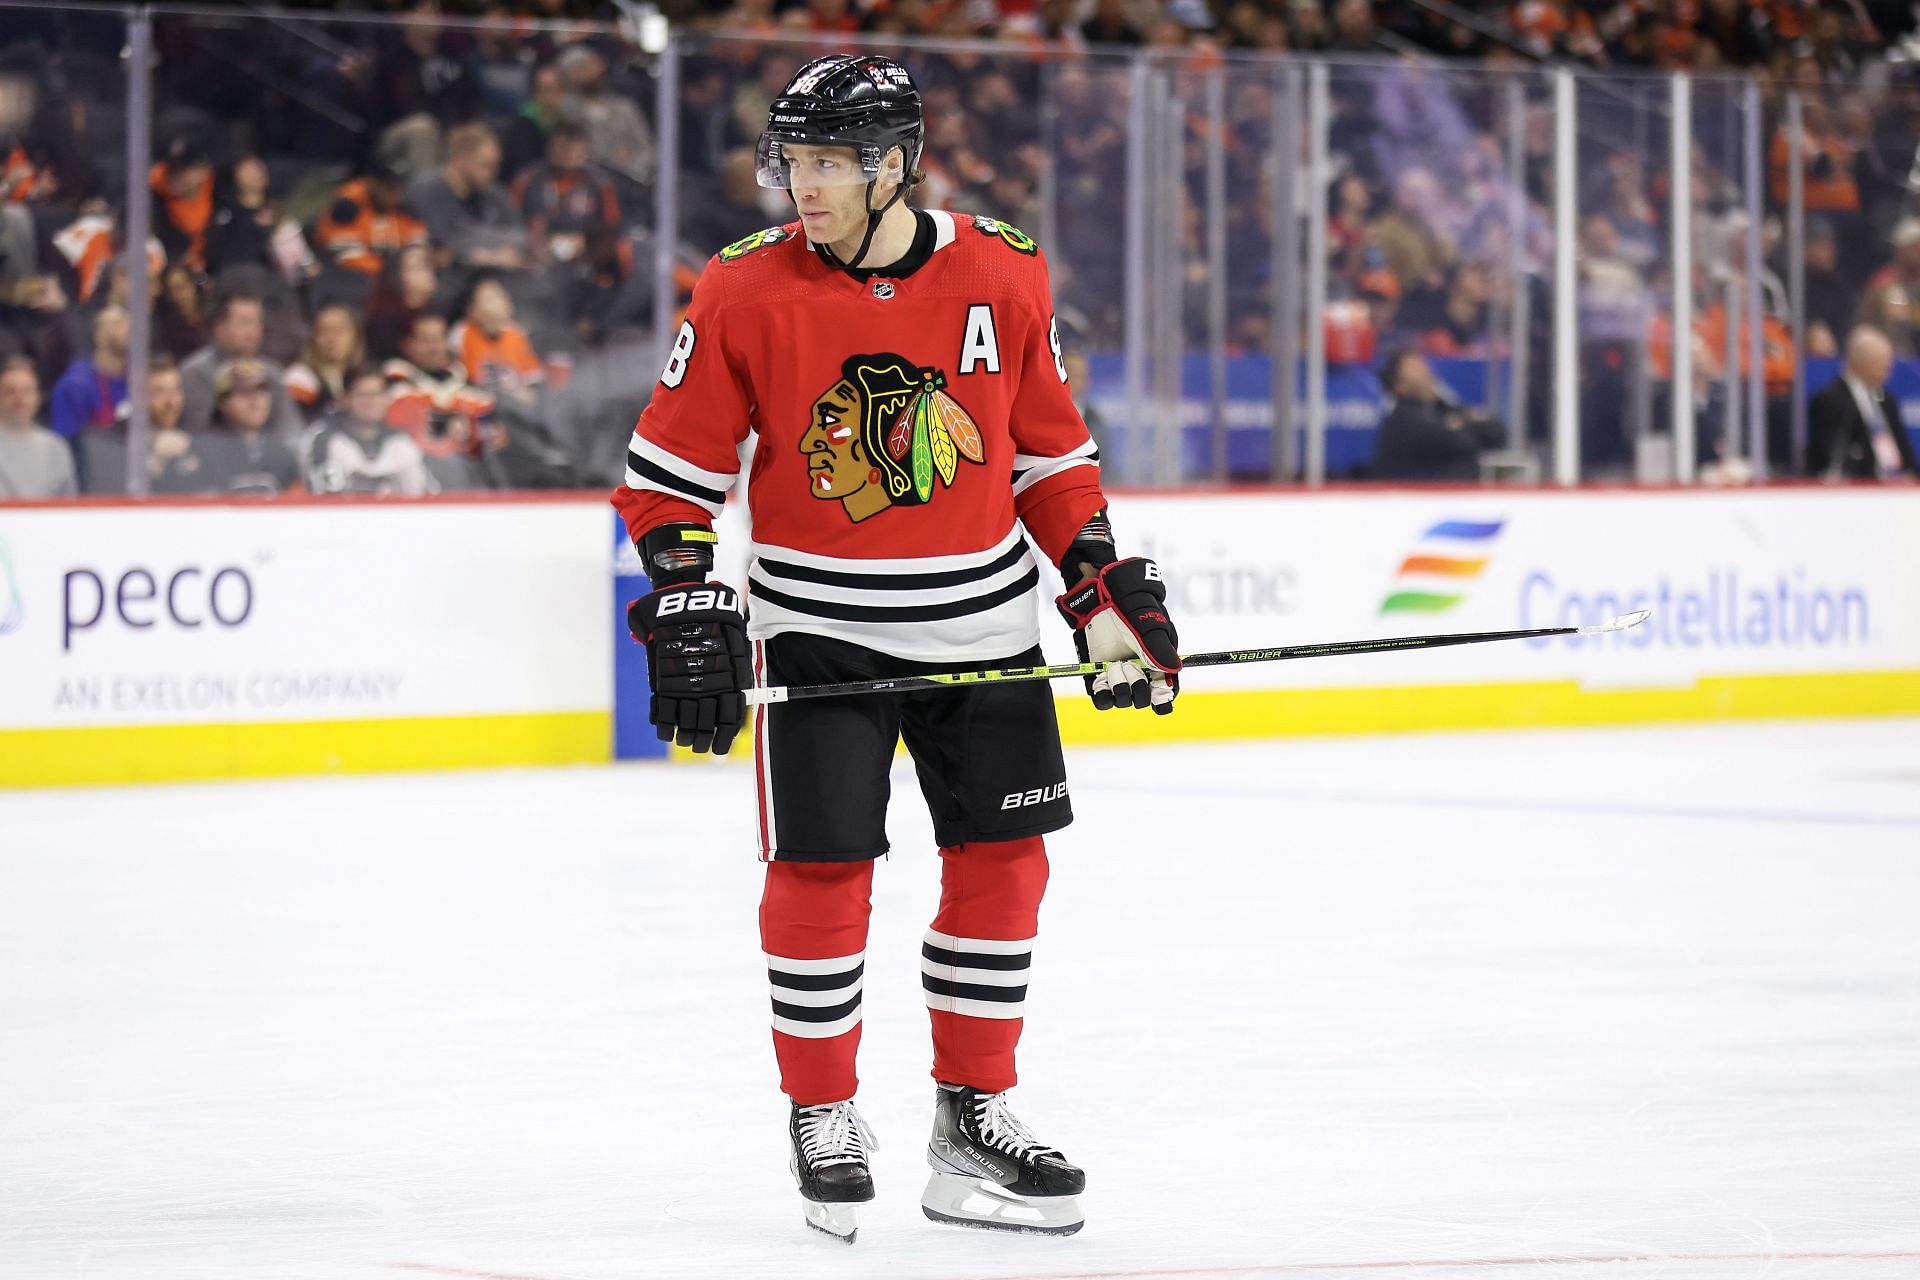 Should the Bruins look into trading for Blackhawks star Patrick